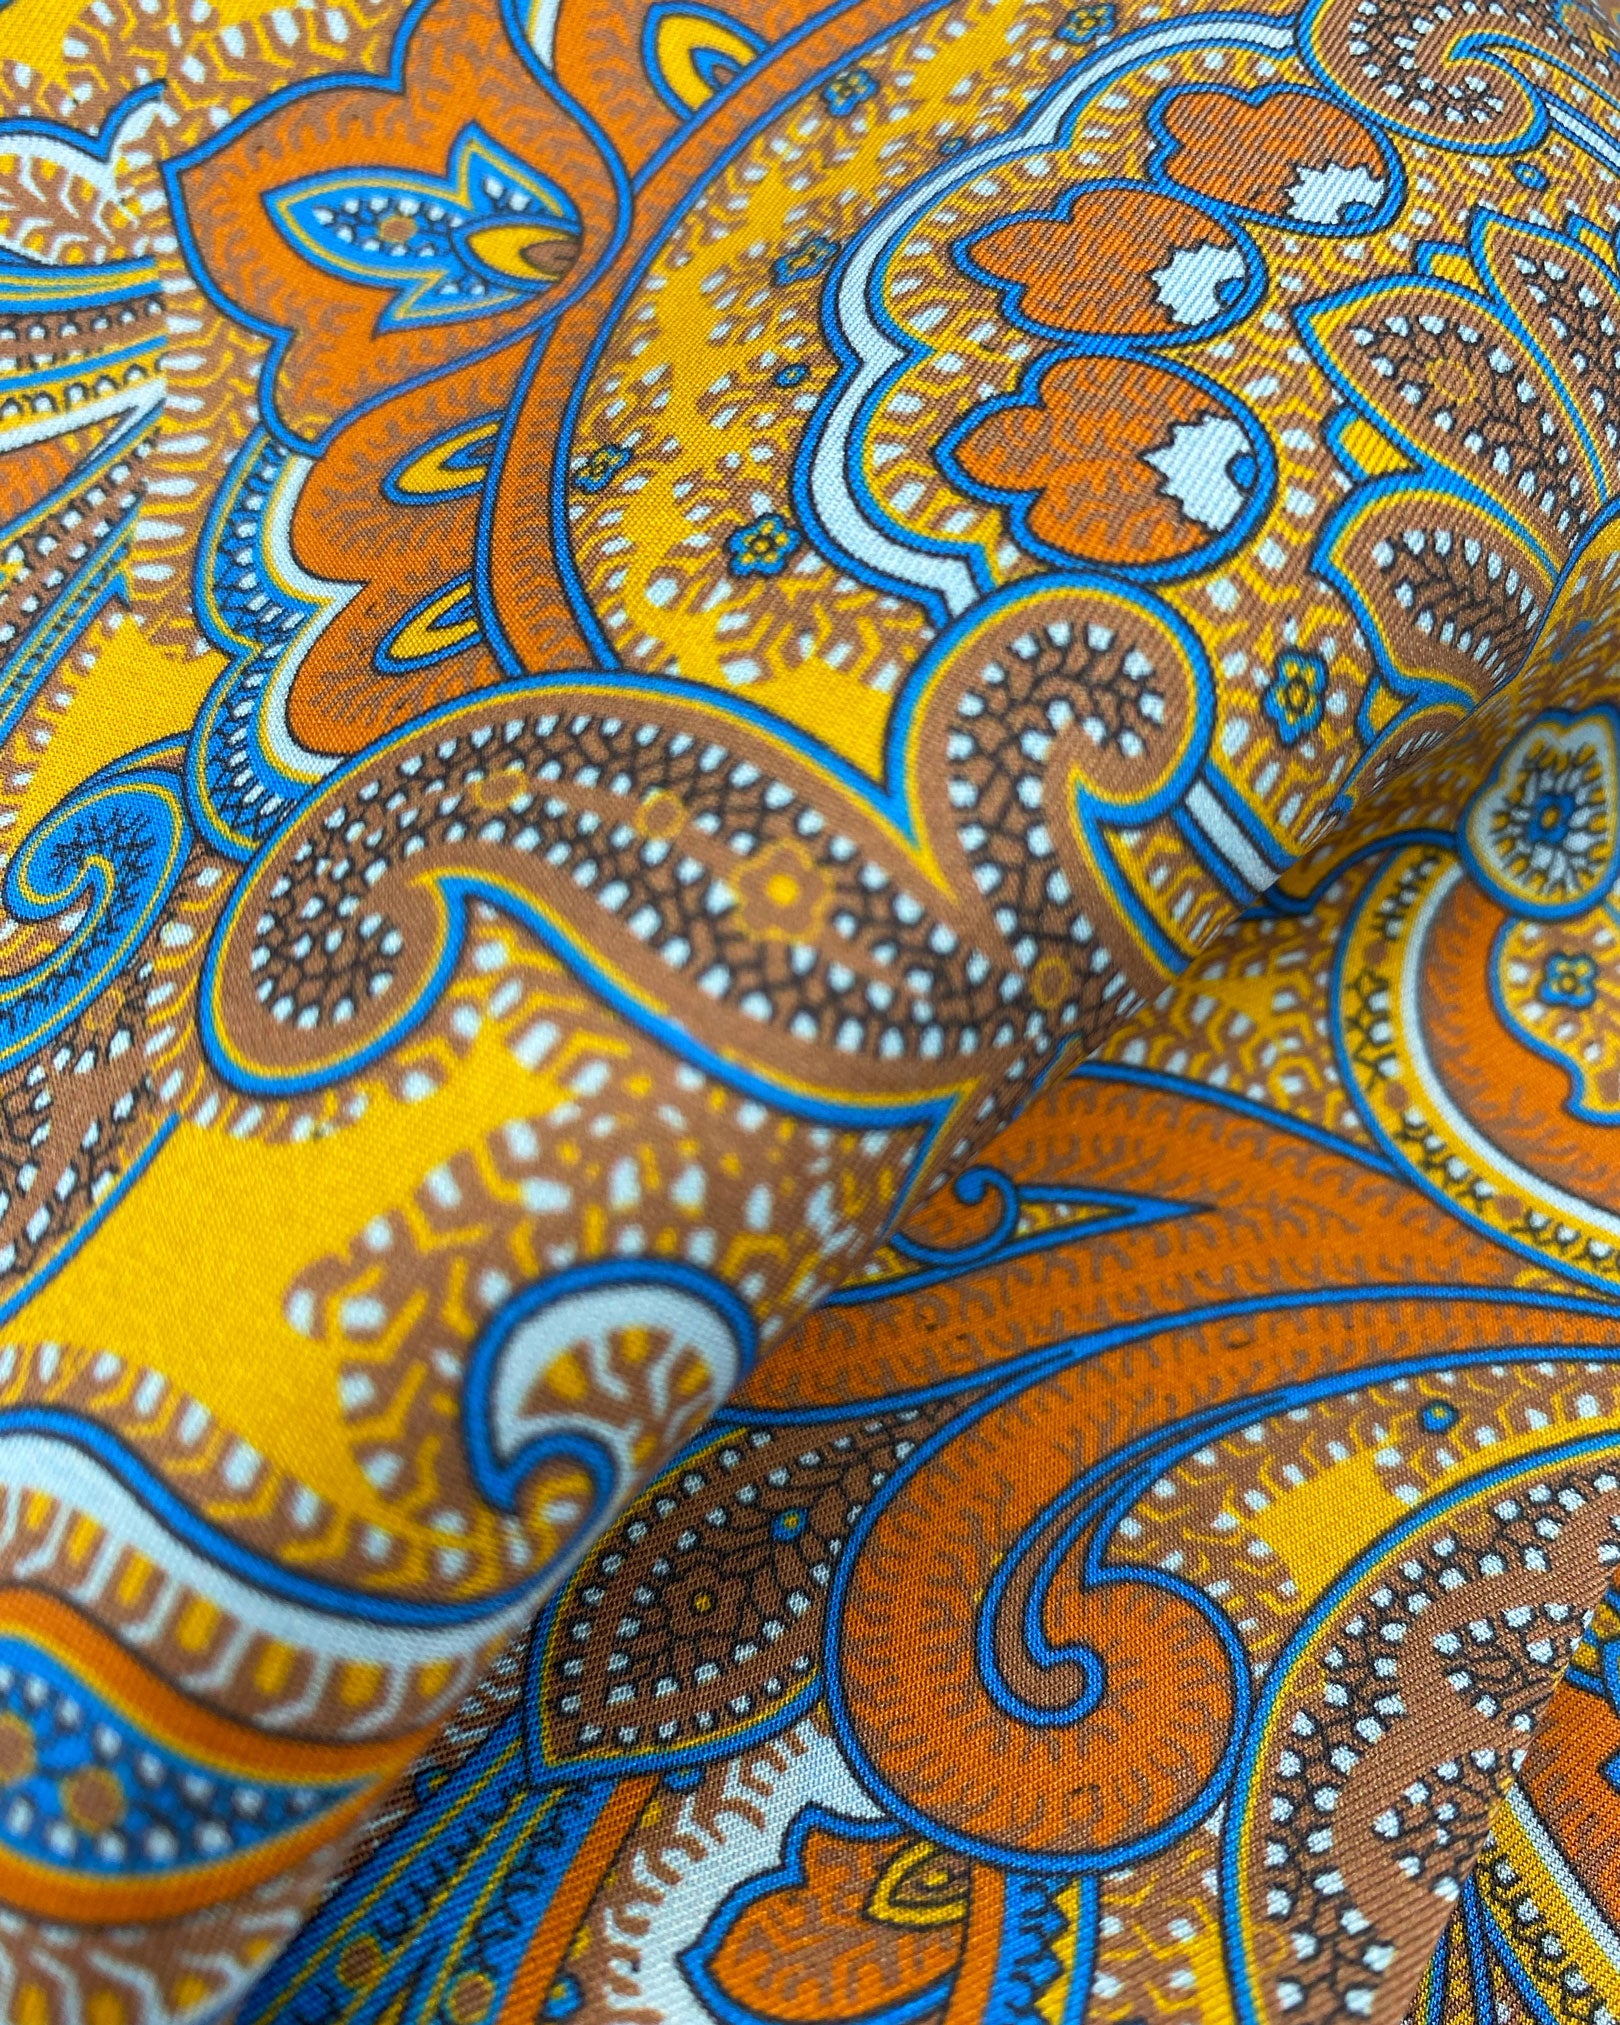 Ruffled close-up view of the Carnaby neckerchief, presenting a closer view of the swirls of warm paisley tones against a bright golden ground and lustre of the silk material.